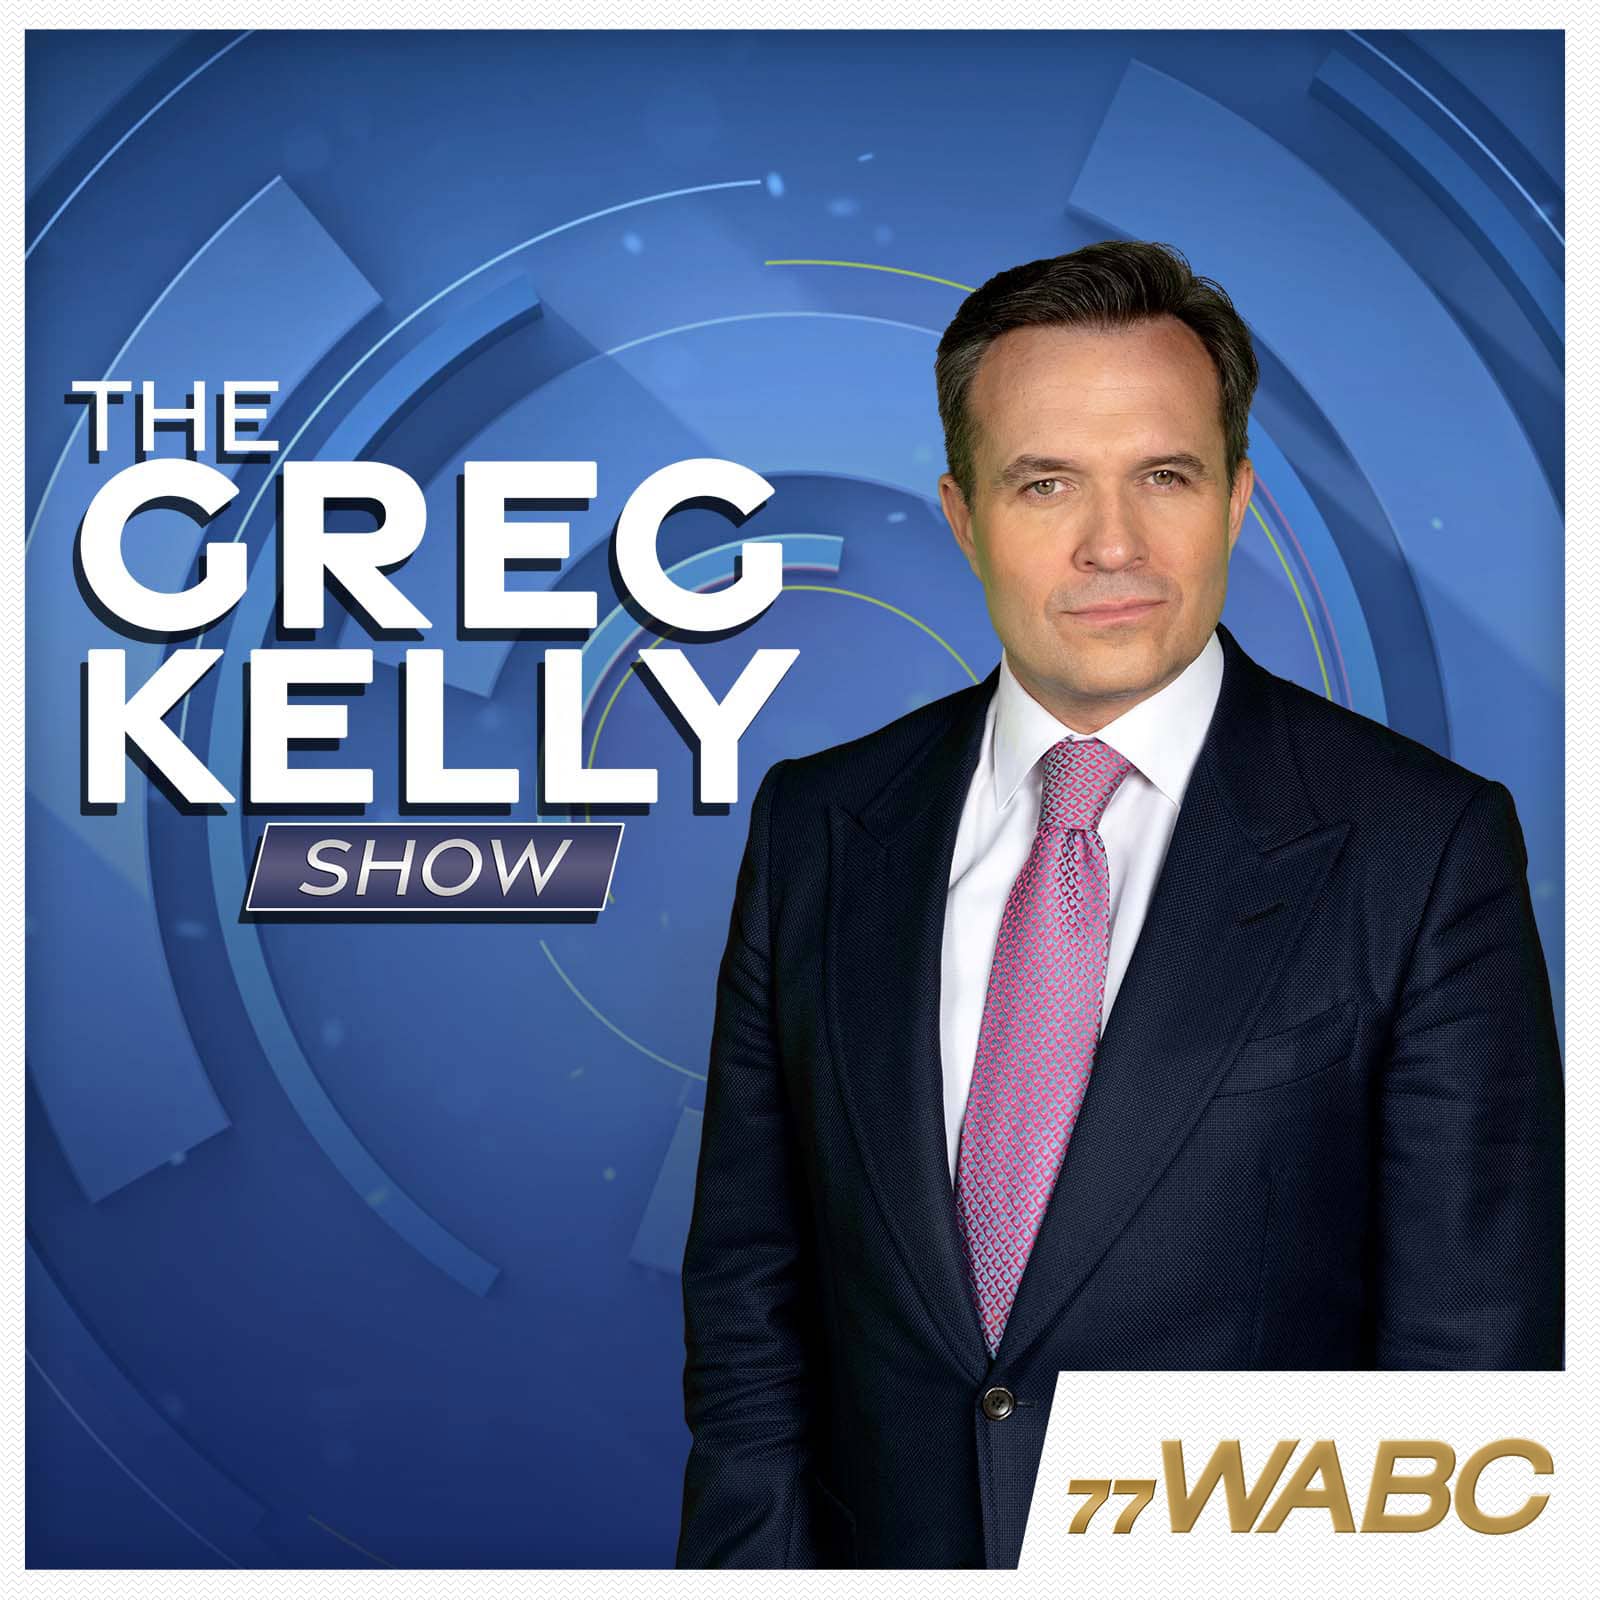 The Greg Kelly Show